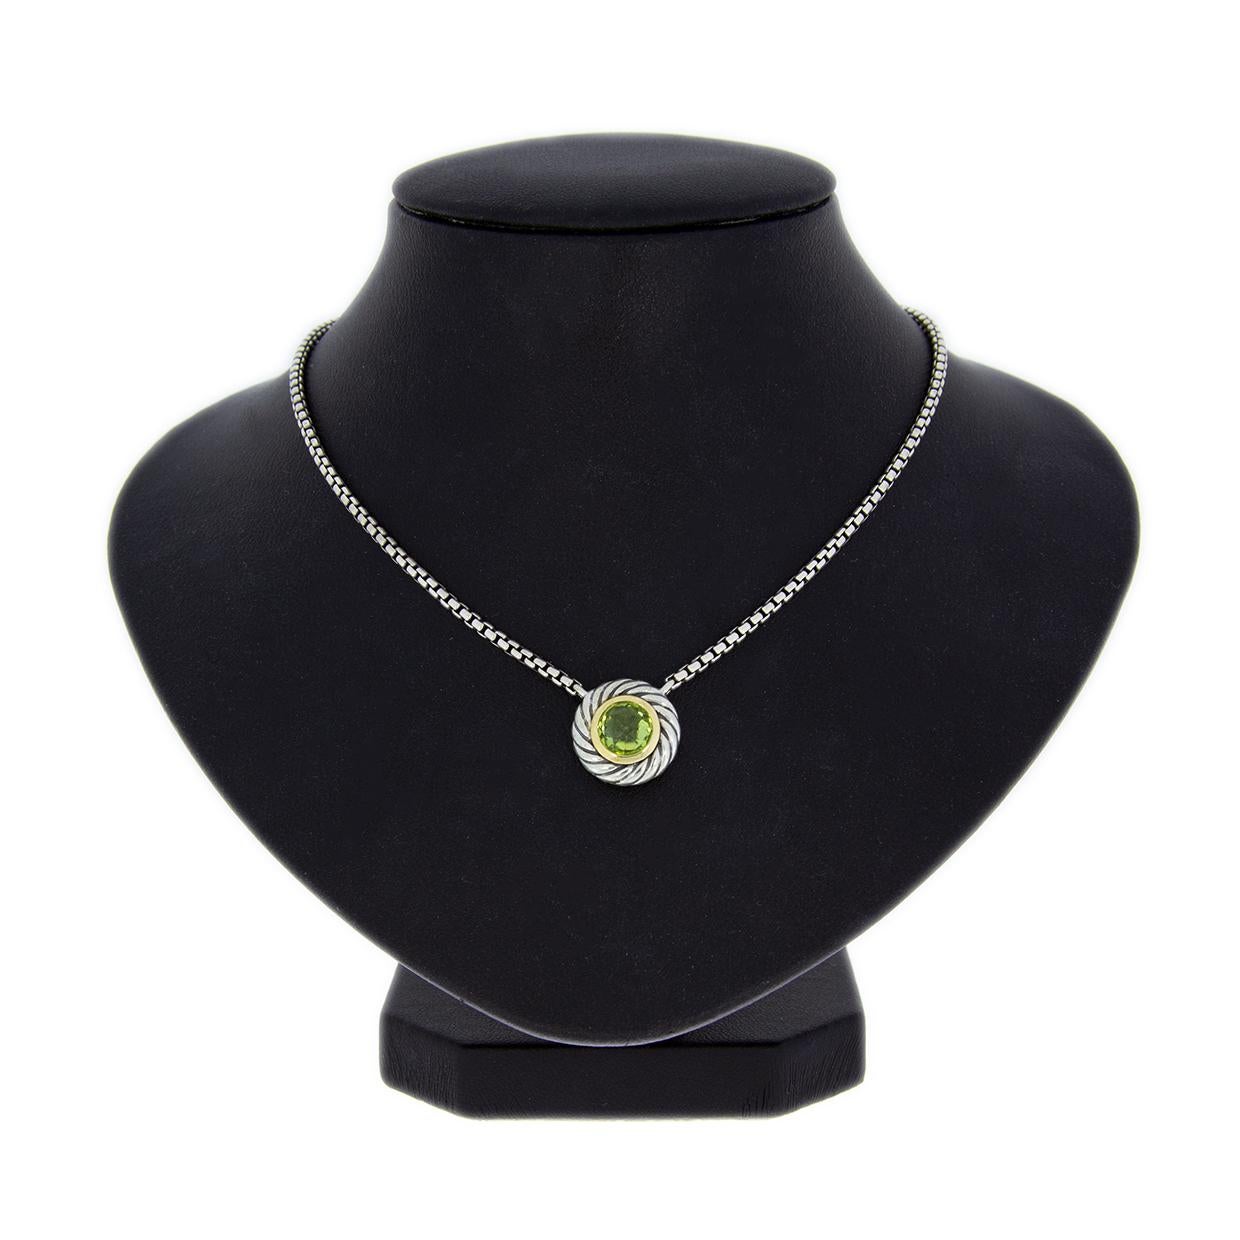 Item Details

Main Stone Shape Round Cut
Main Stone Treatment Not Enhanced
Main Stone Creation Natural
Main Stone Peridot
Main Stone Color Green
Estimated Retail $475.00
Brand David Yurman
Collection Cookie
Metal Sterling Silver
Fastening